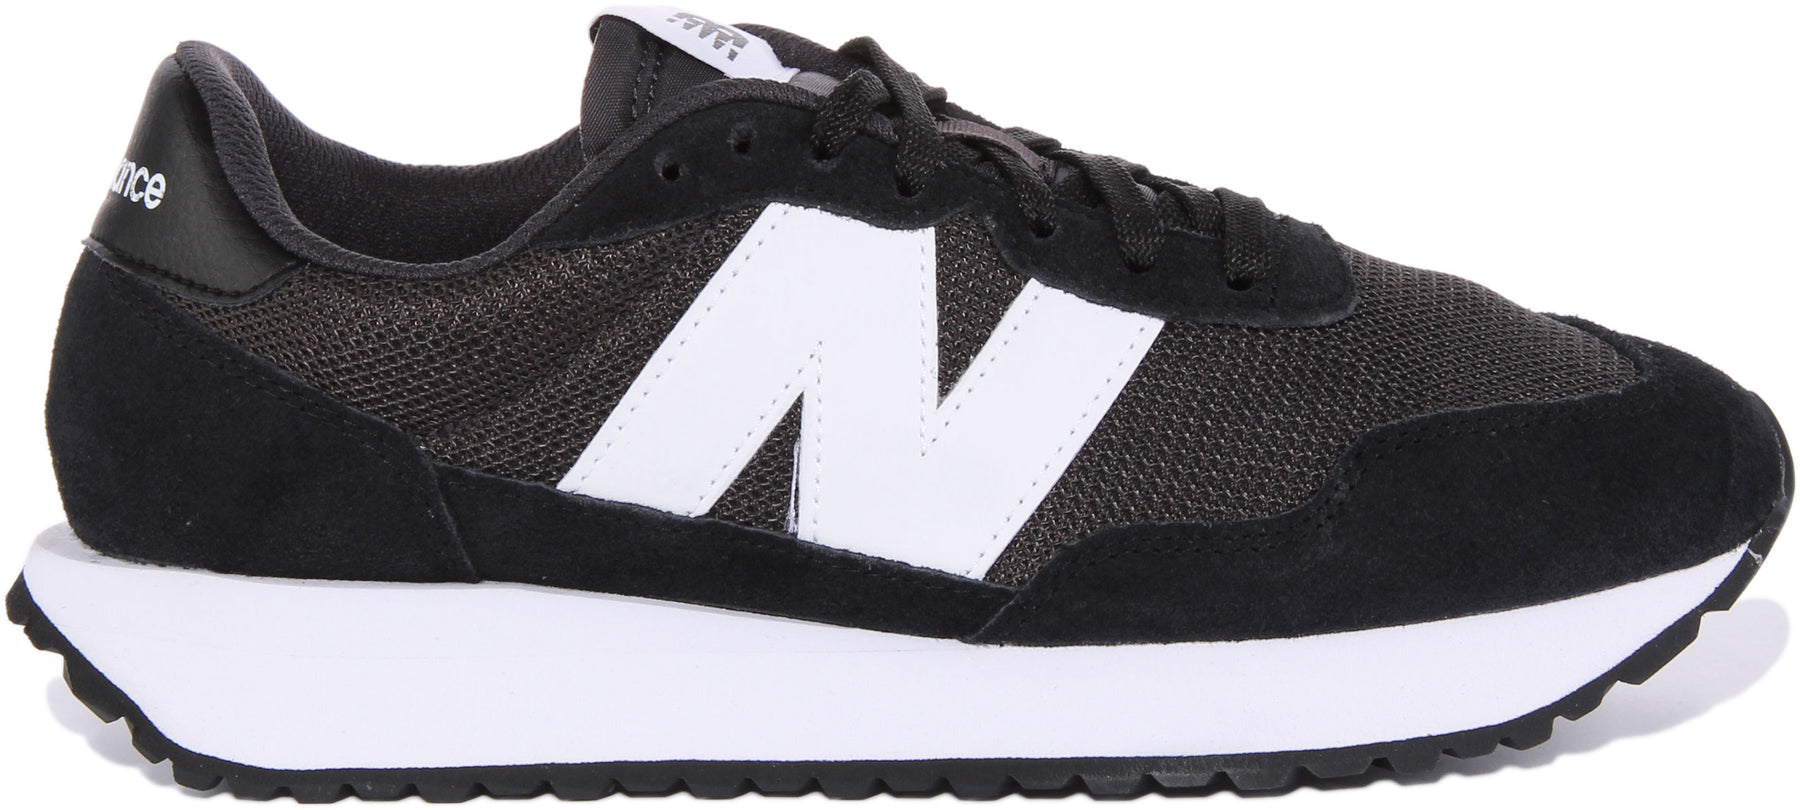 New Balance Ms237 In Black White | Lace up Retro Style Trainers ...